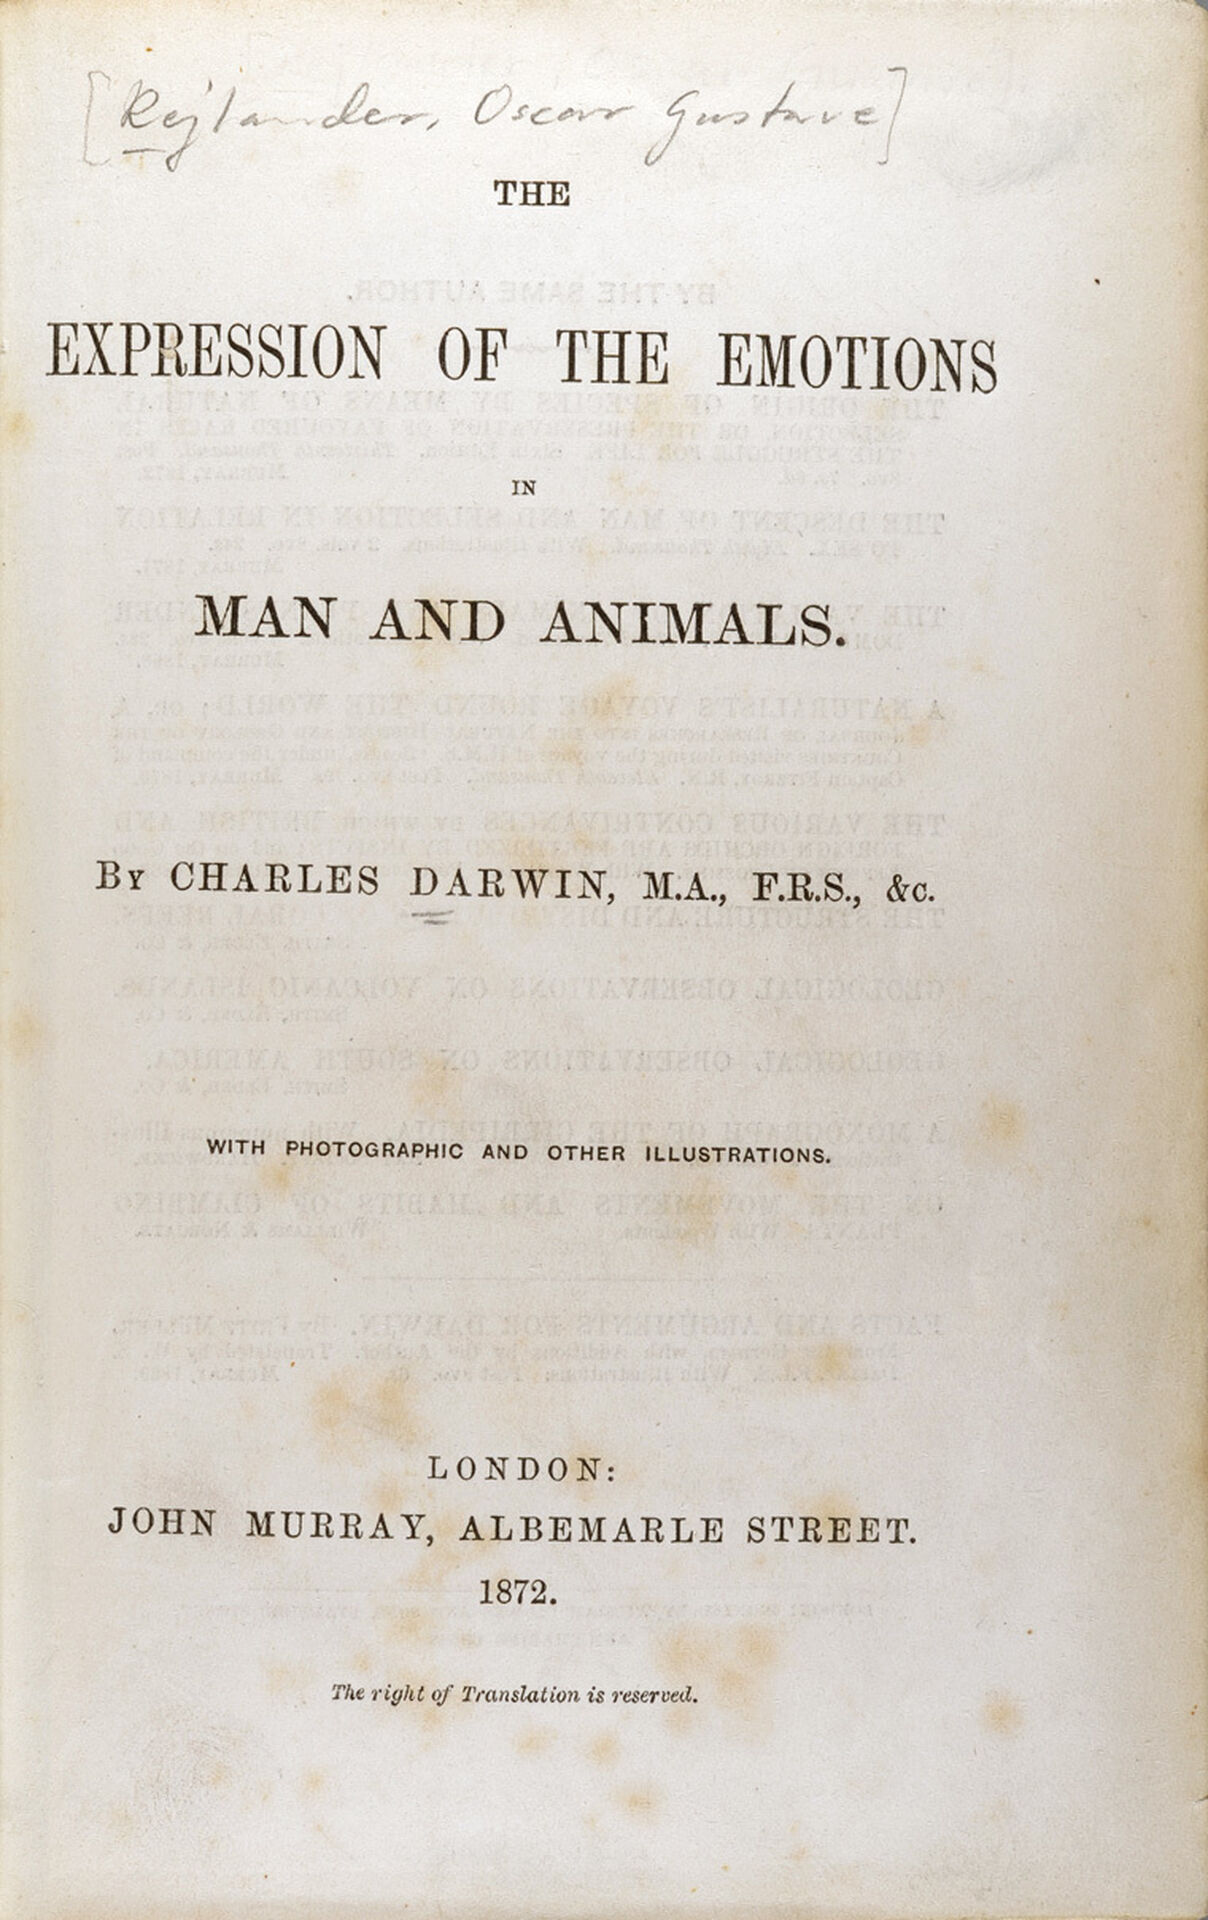 The cover of The Expression of the Emotions in Man and Animals